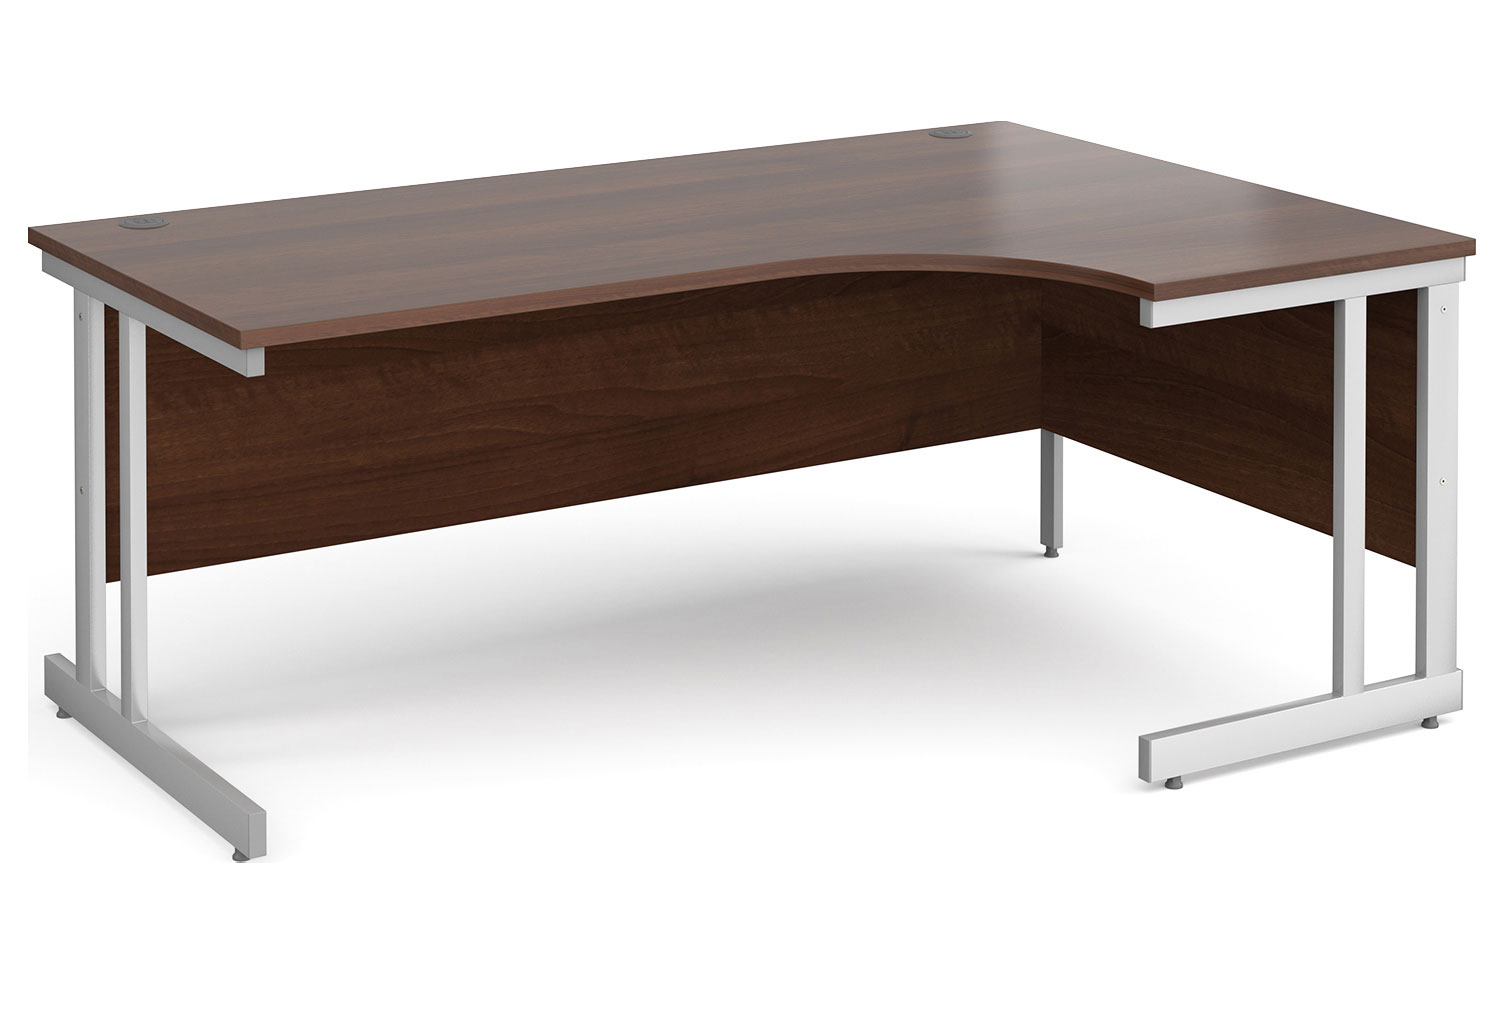 All Walnut Double C-Leg Ergonomic Right Hand Office Desk, 180wx120/80dx73h (cm), Express Delivery